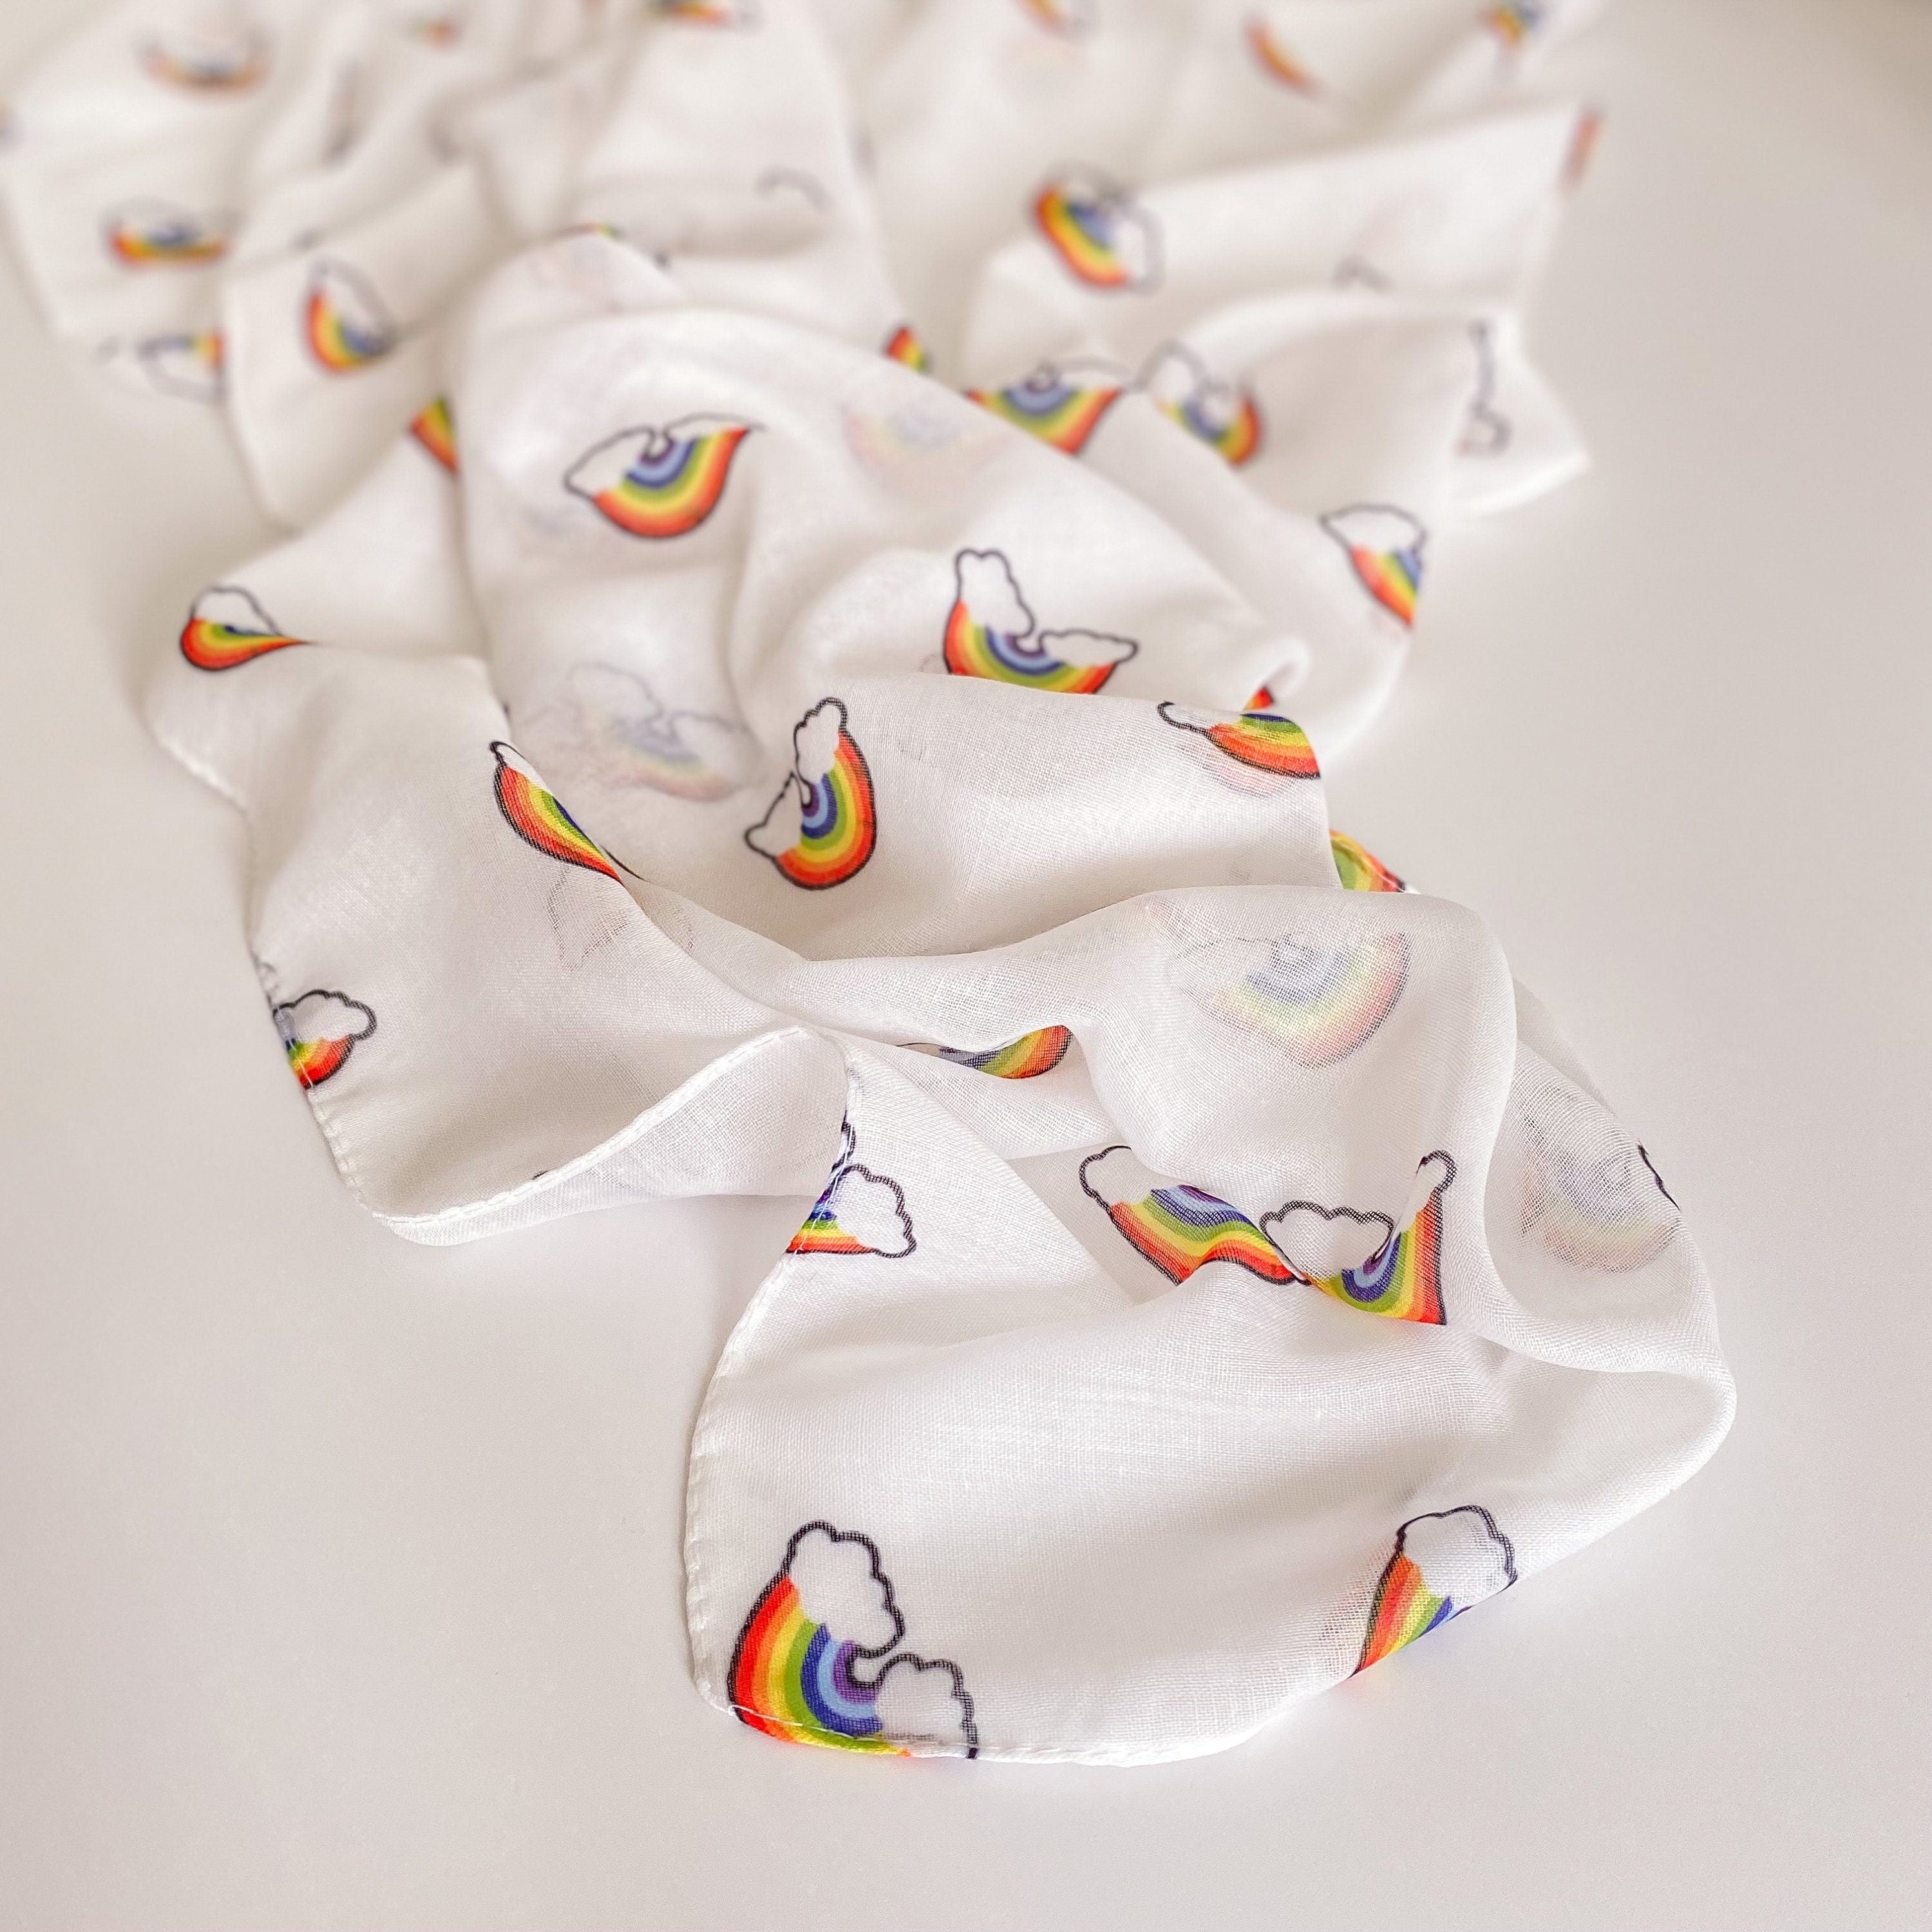 Rainbow Cotton Scarf In A Personalised Metal Gift Box, Gift For Her, Inspirational Gift